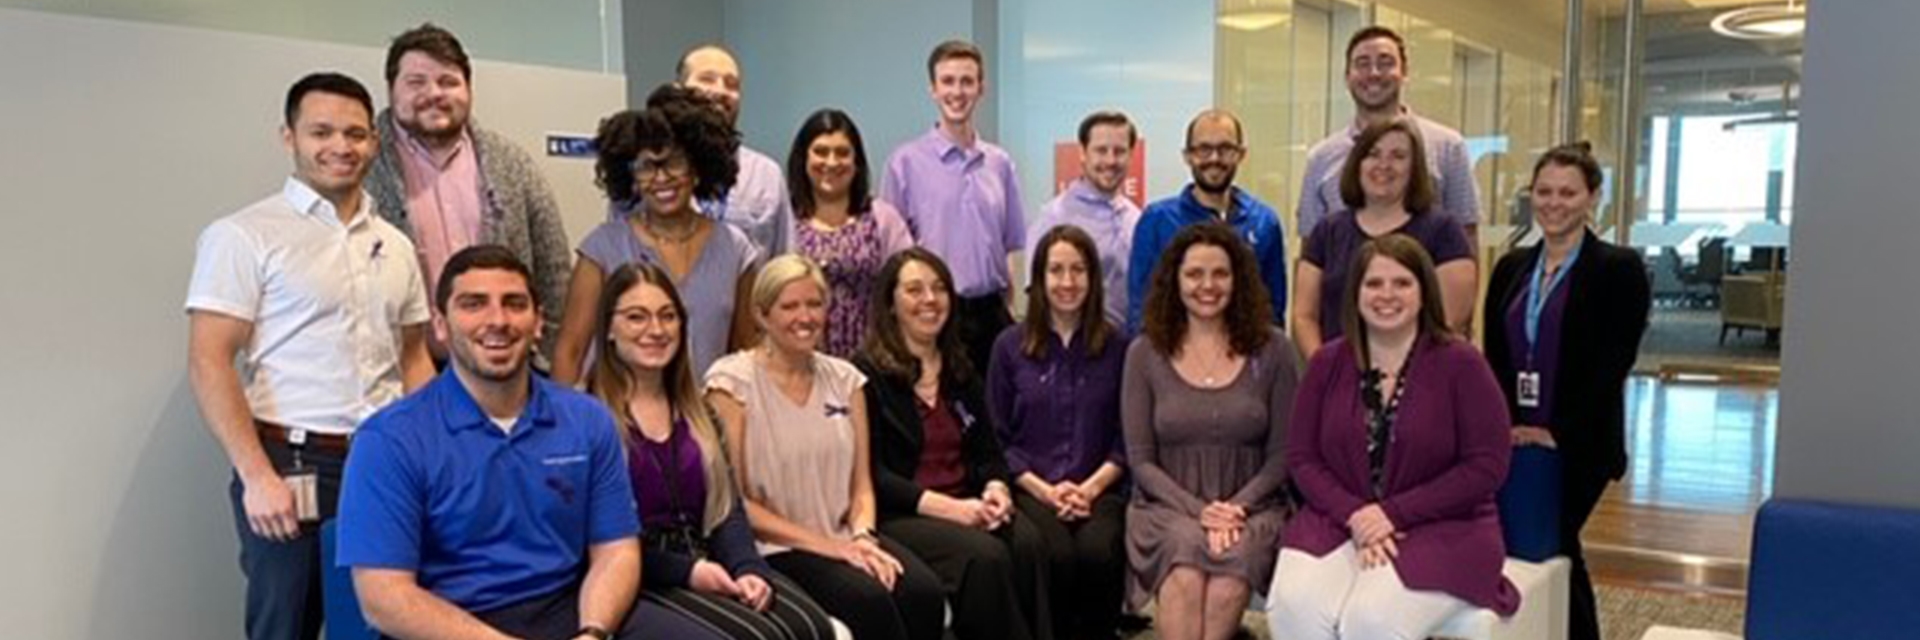 FTW and DAL International Woman’s Day group shots (everyone is wearing a purple ribbon and some even dressed in purple to commemorate the day)